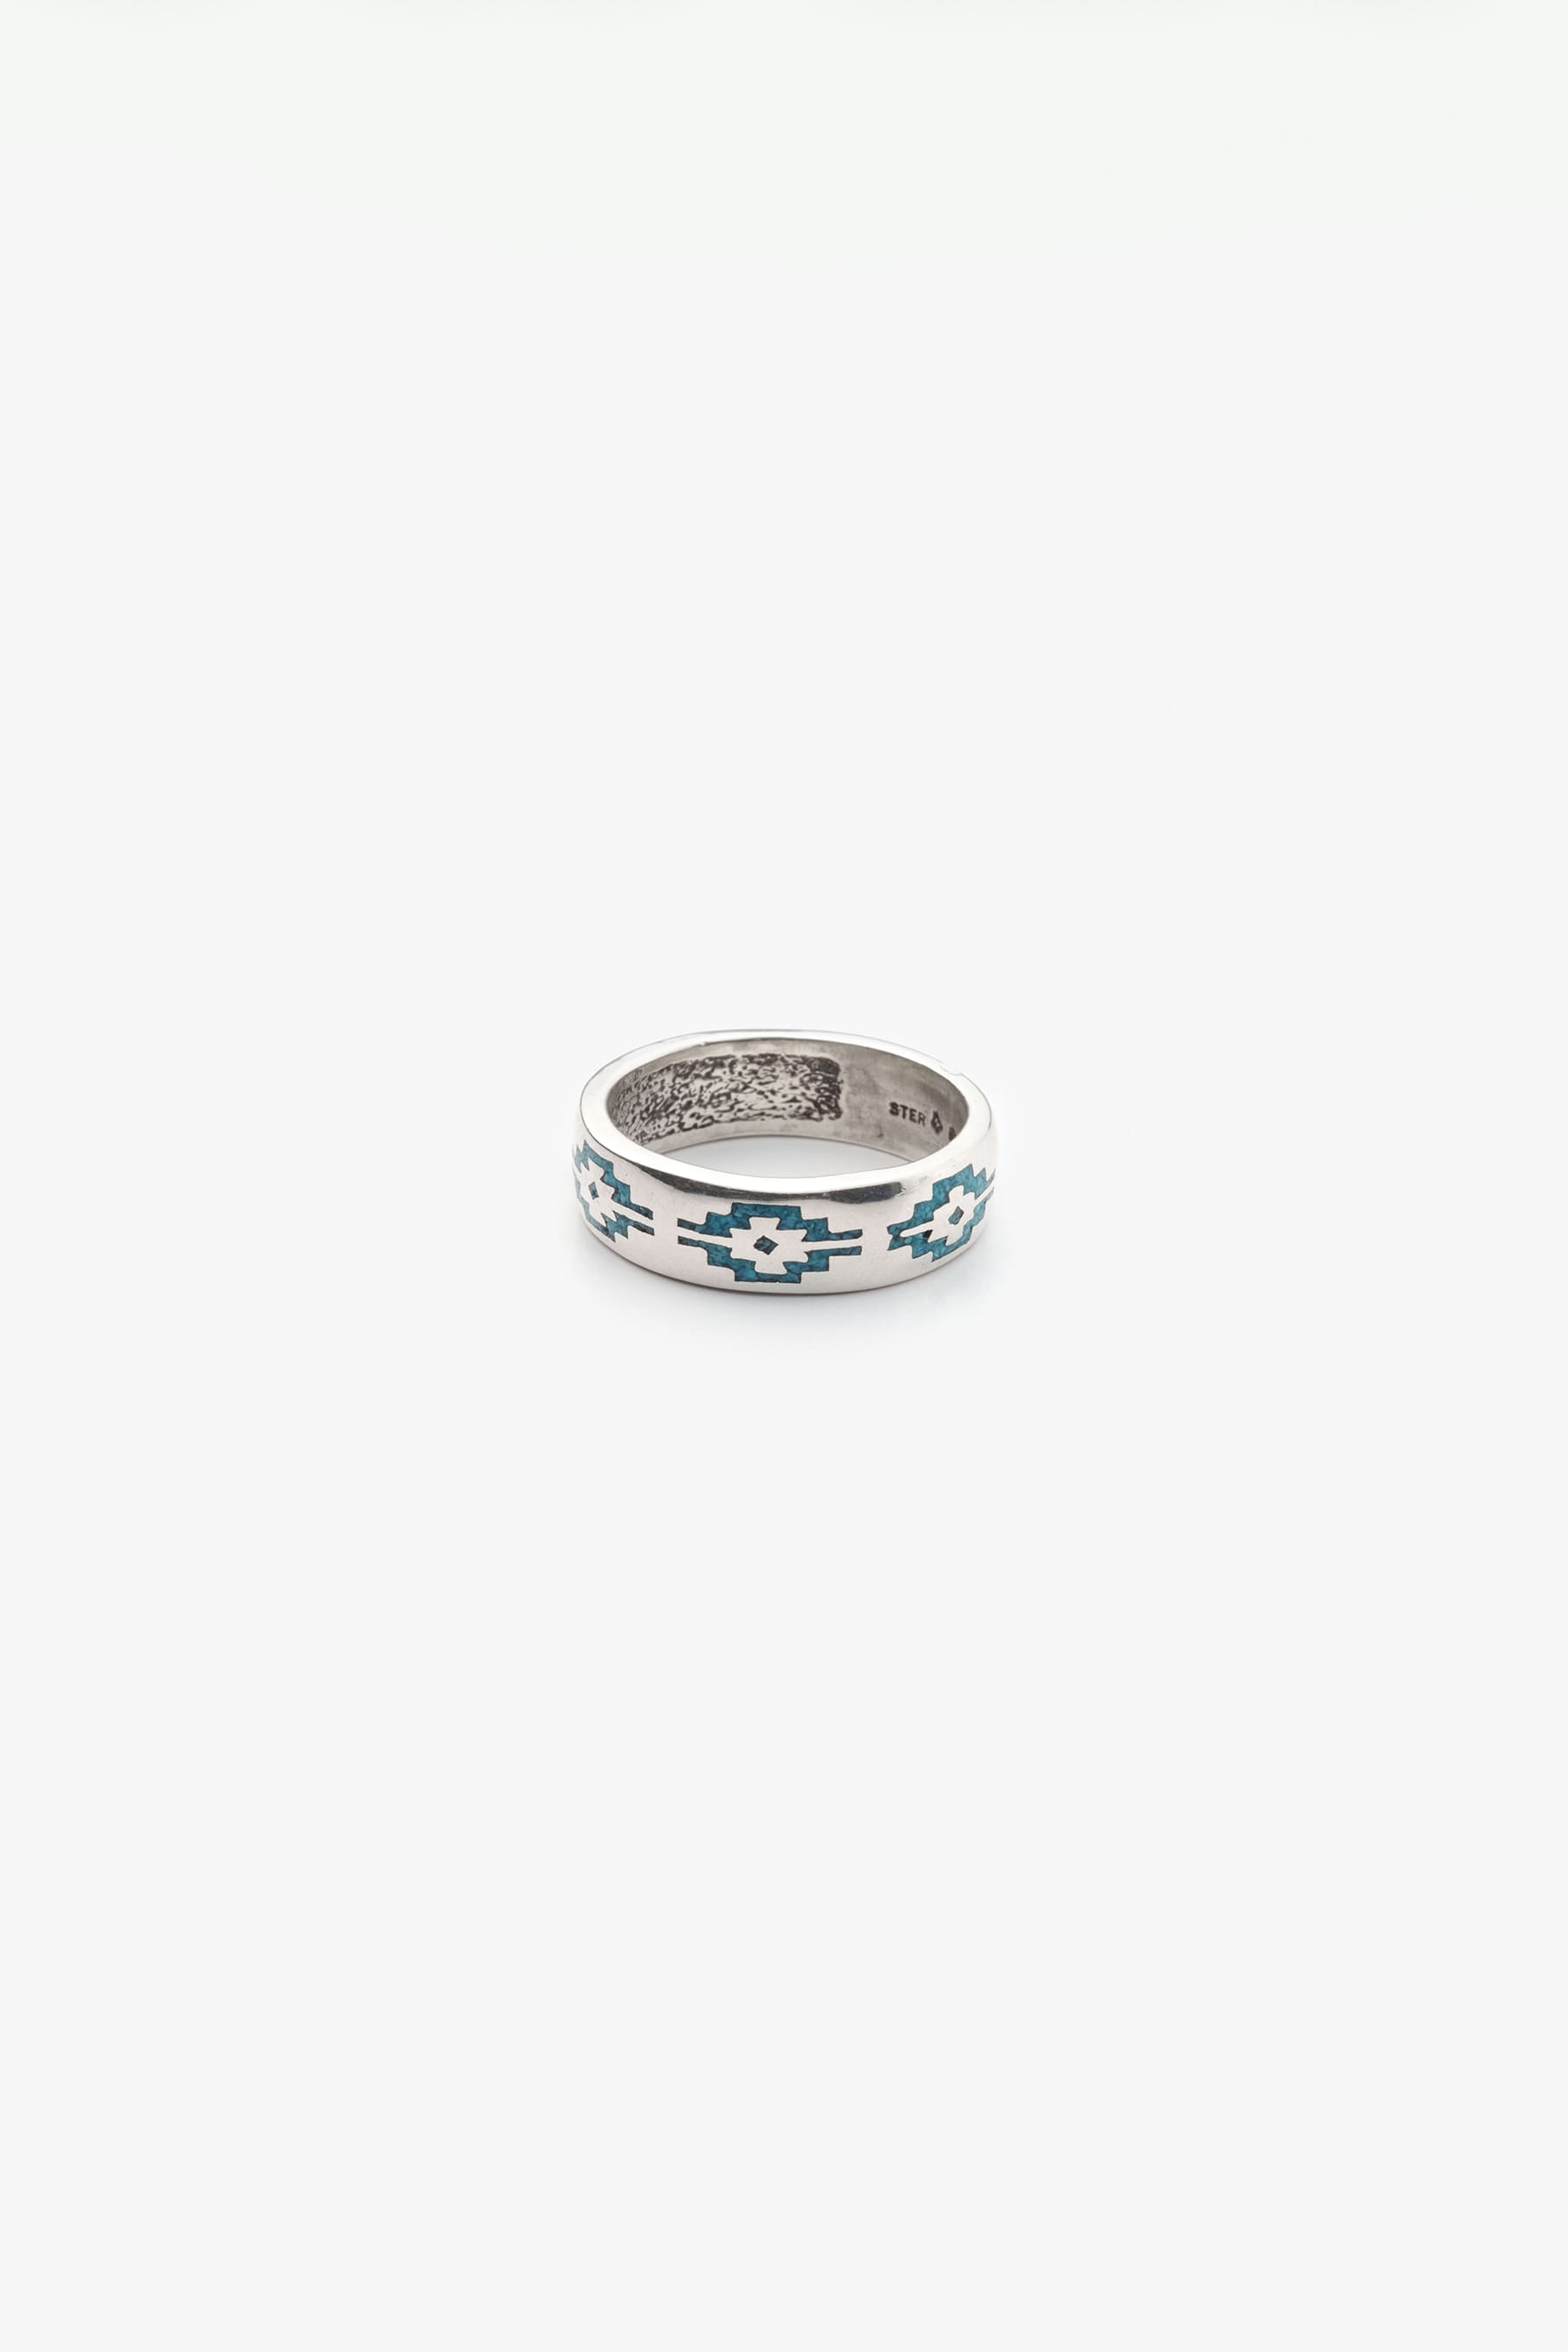 TURQUOISE R557 RING